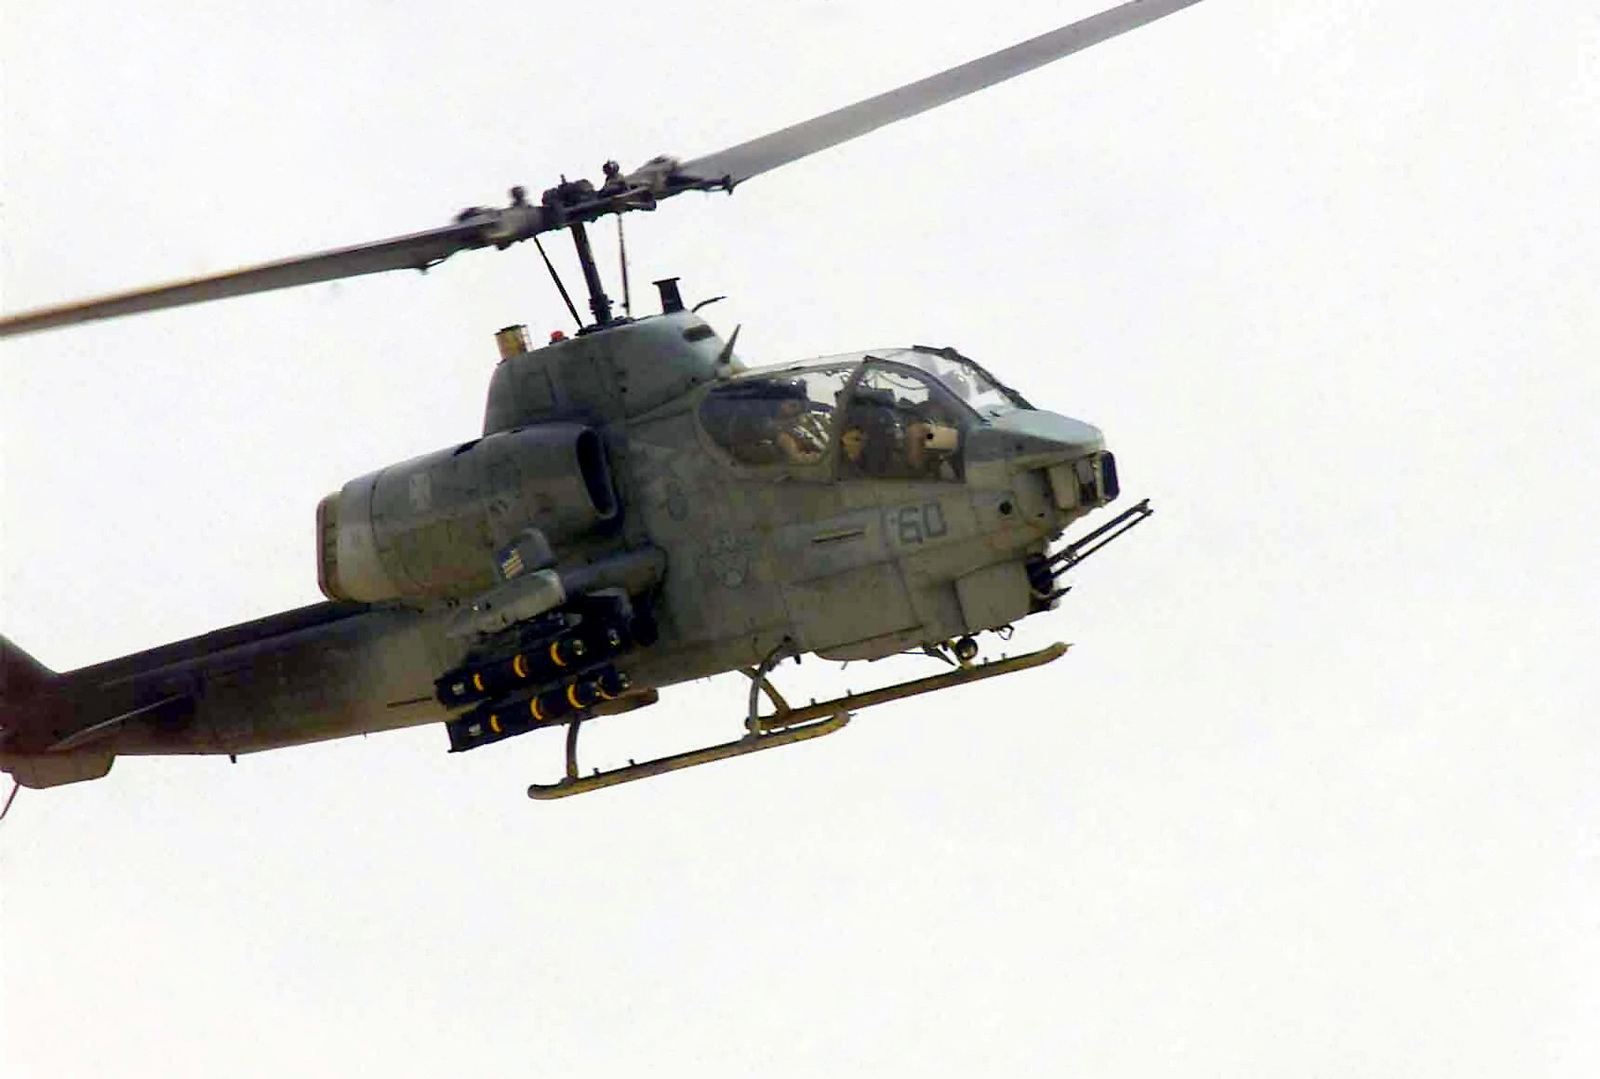 a-us-marine-corps-usmc-ah-1w-super-cobra-helicopter-armed-with-agm-114-hellfire-269f57-1600.jpg